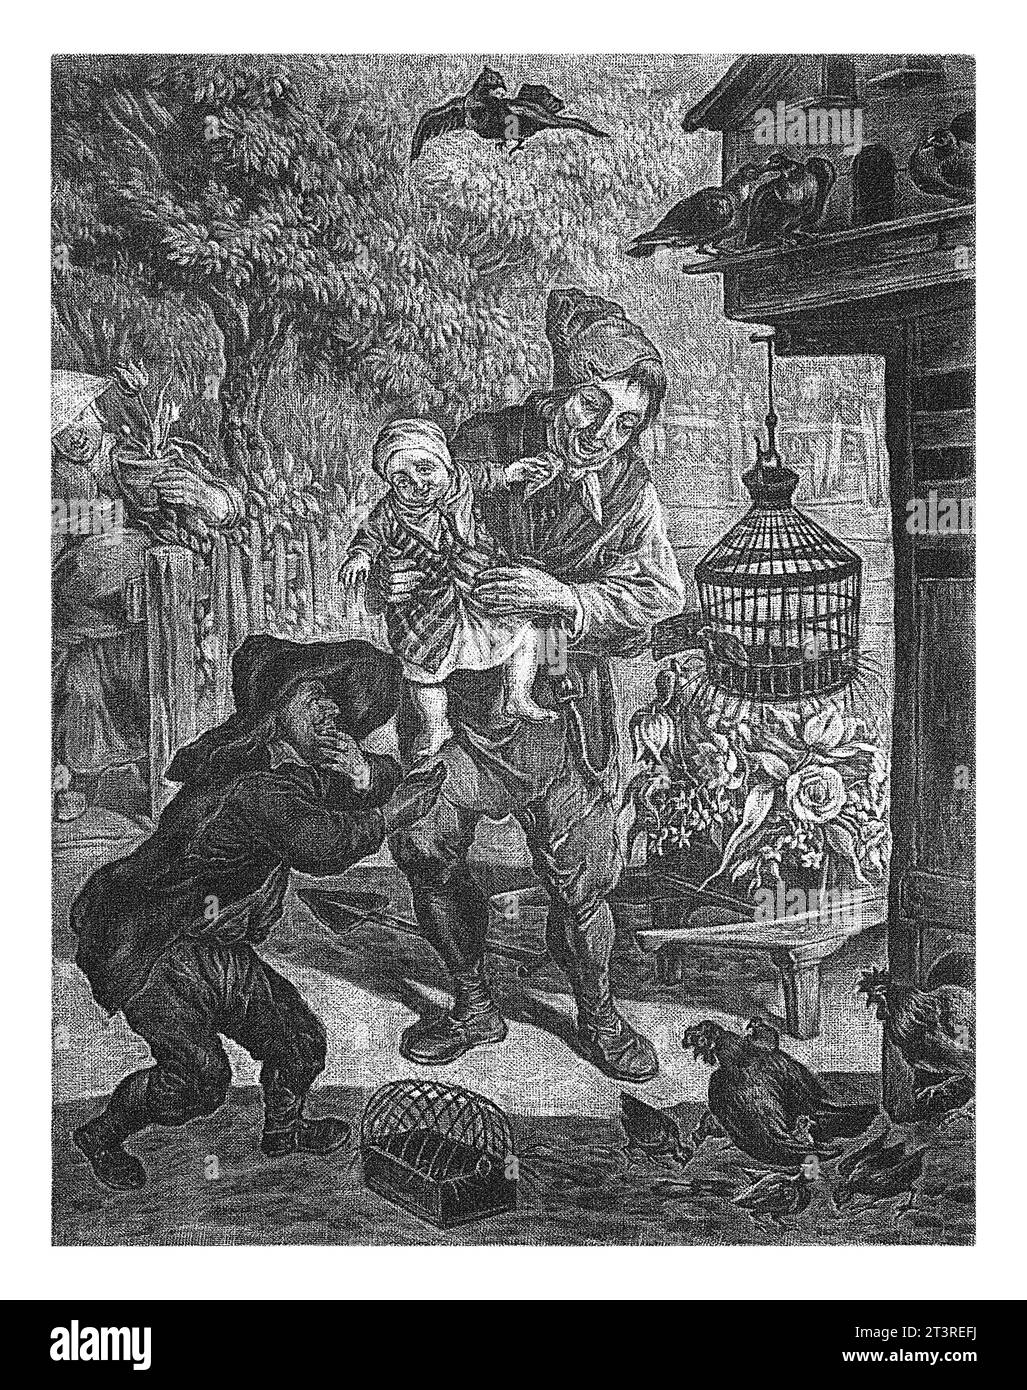 May, Cornelis Dusart, 1679 - 1704 A man with a child on his arm is standing near a dovecote, looking at chicks scratching the ground. A second man wal Stock Photo